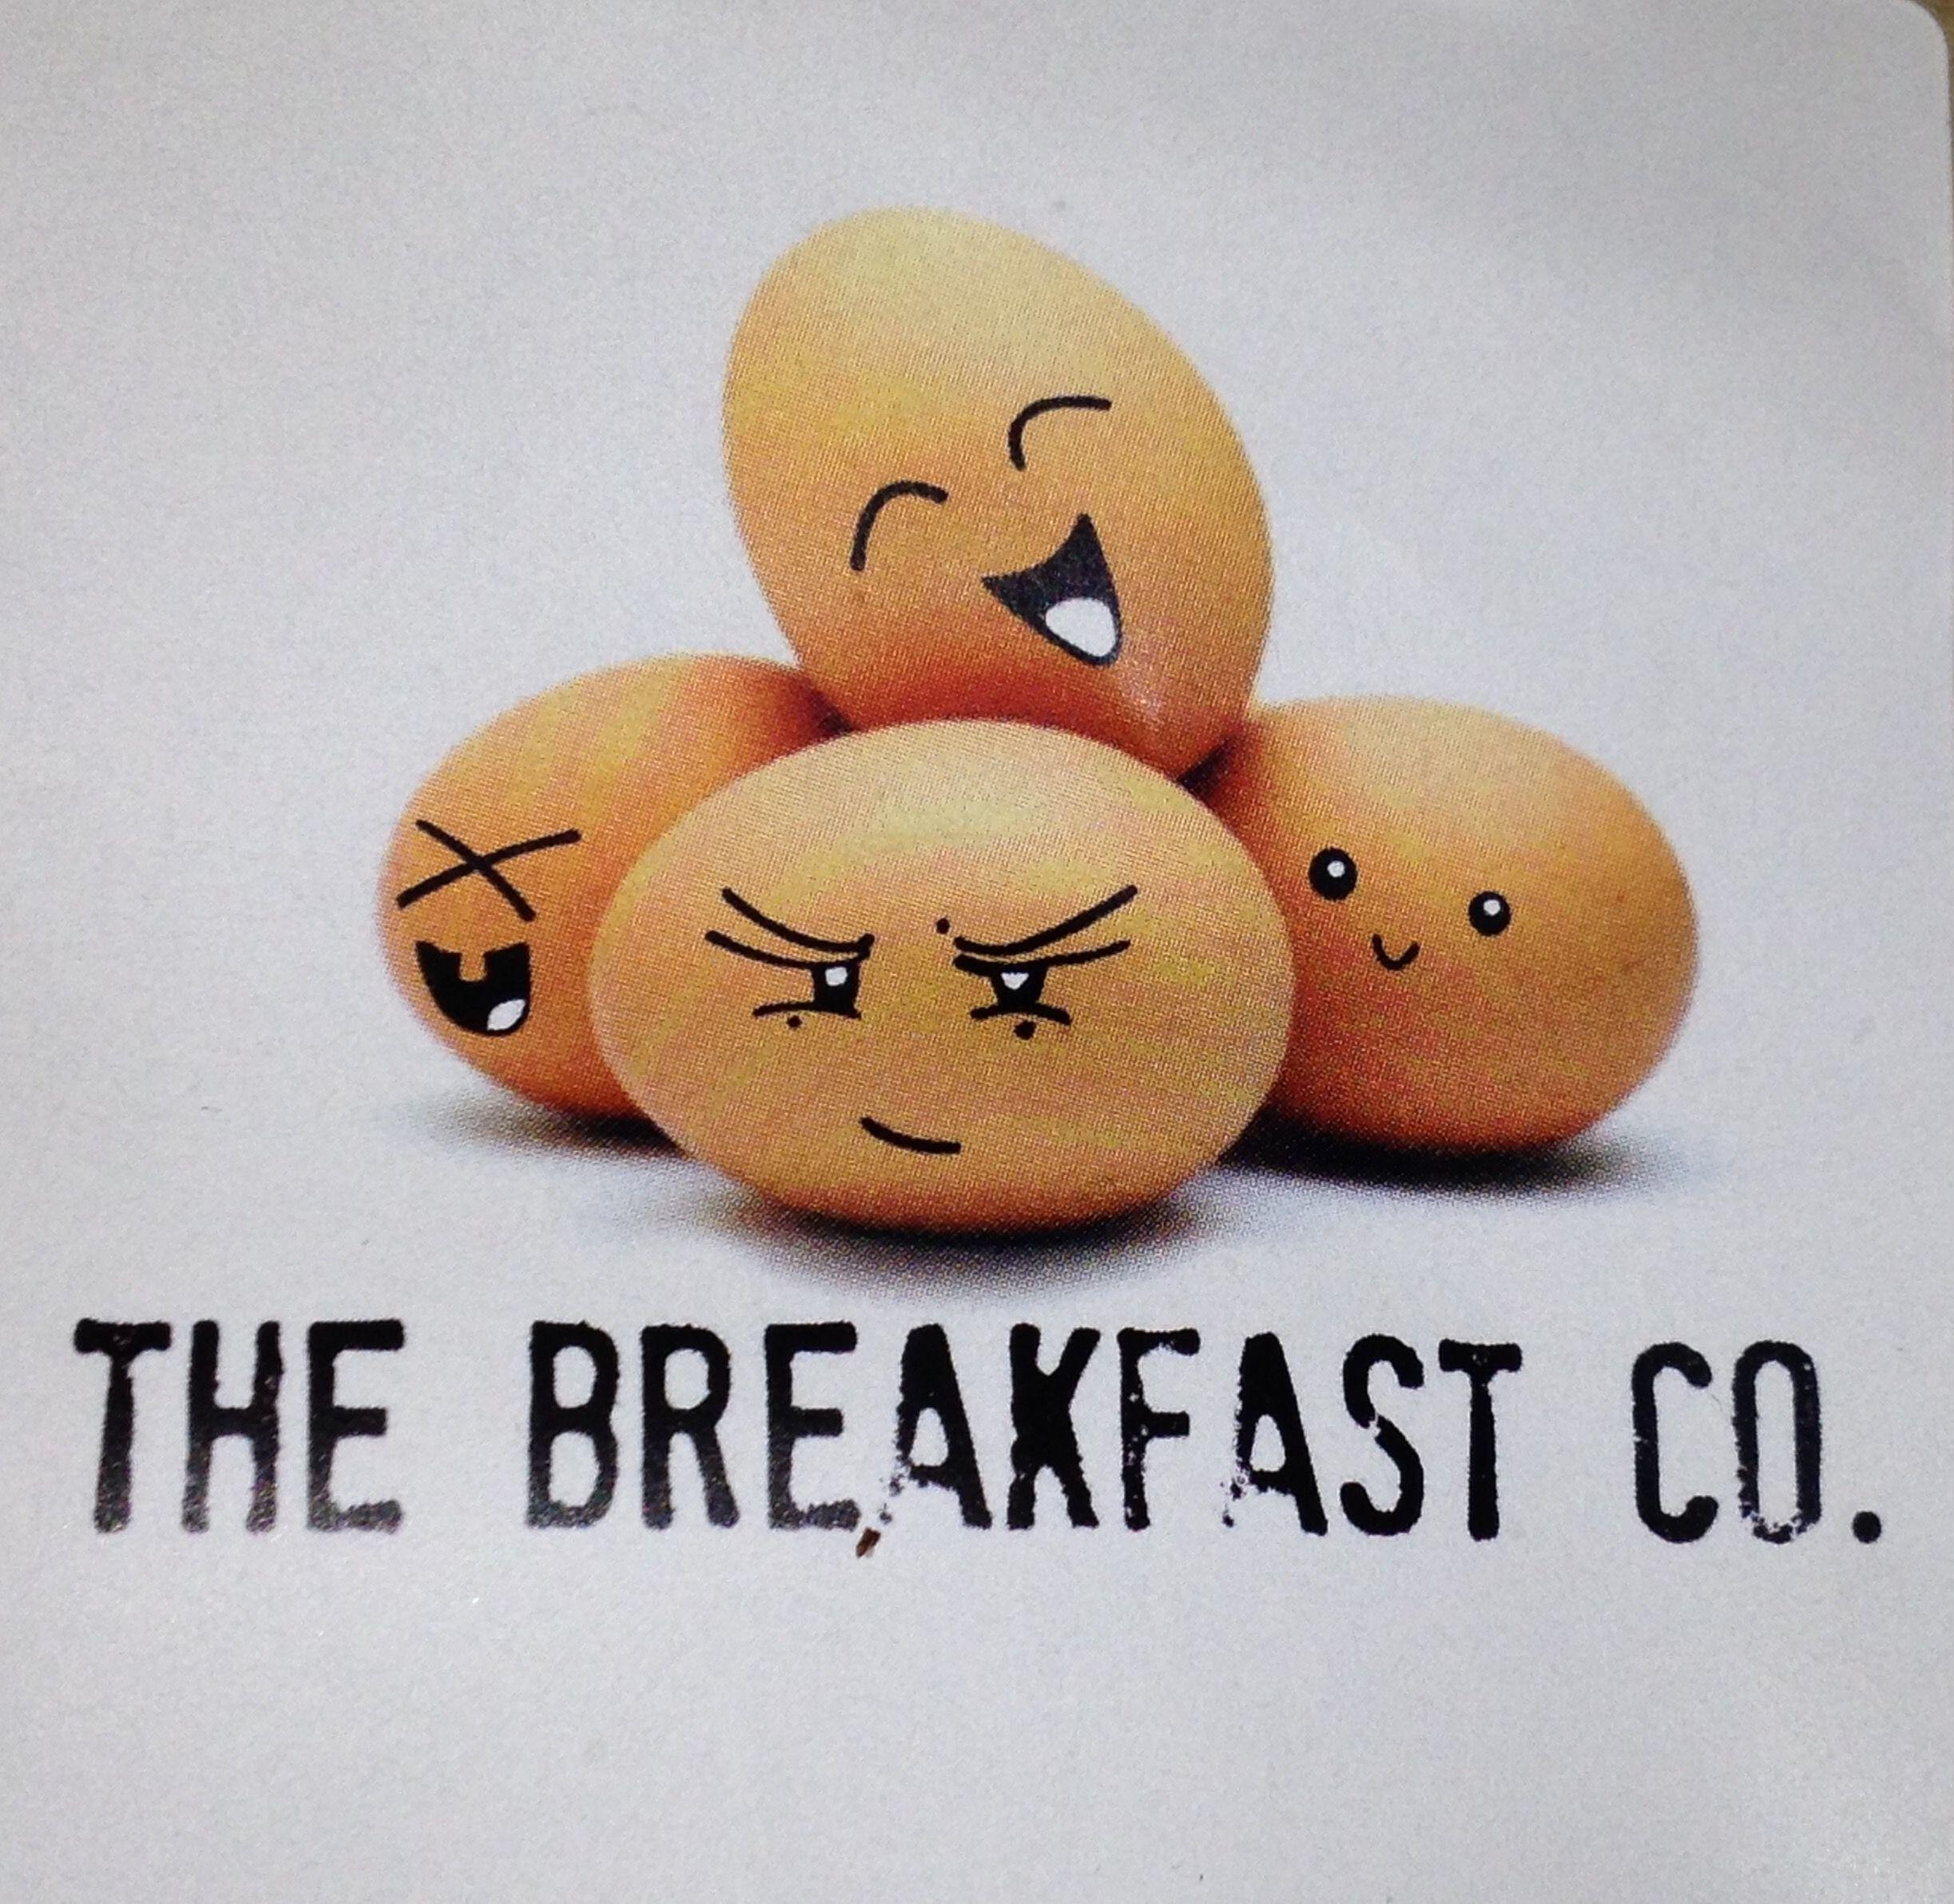 Breakfast Company Logo - The Breakfast Co - Home Delivery Service - South London Blog